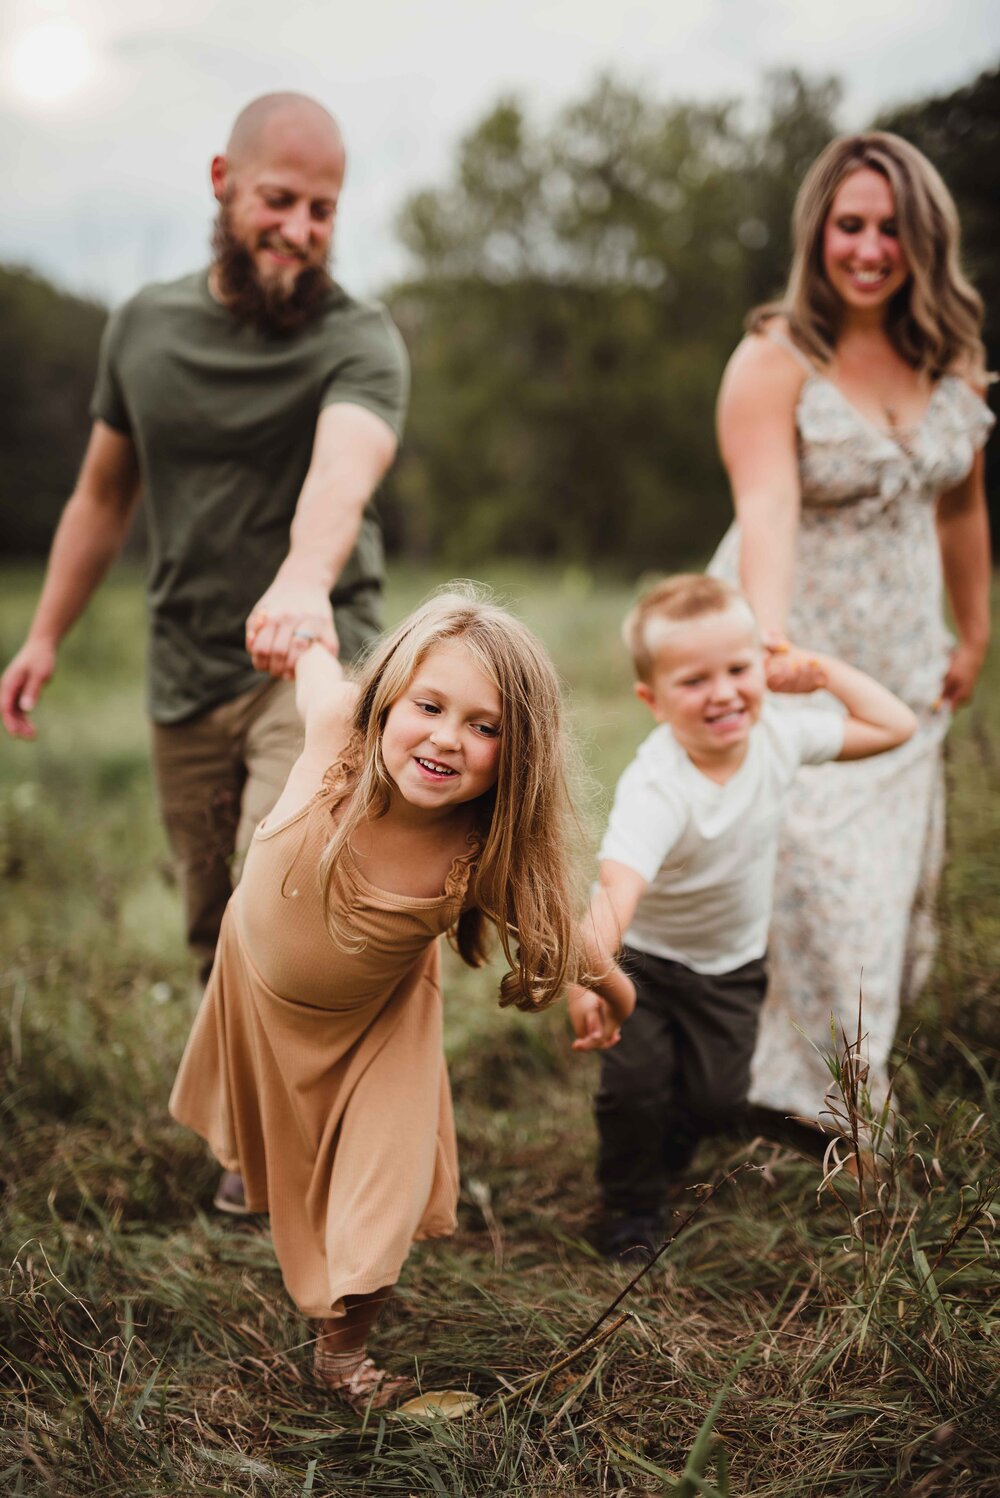 family photoshoots. 70+ Best Family Photoshoot Outfit Ideas That You Must Check - 23